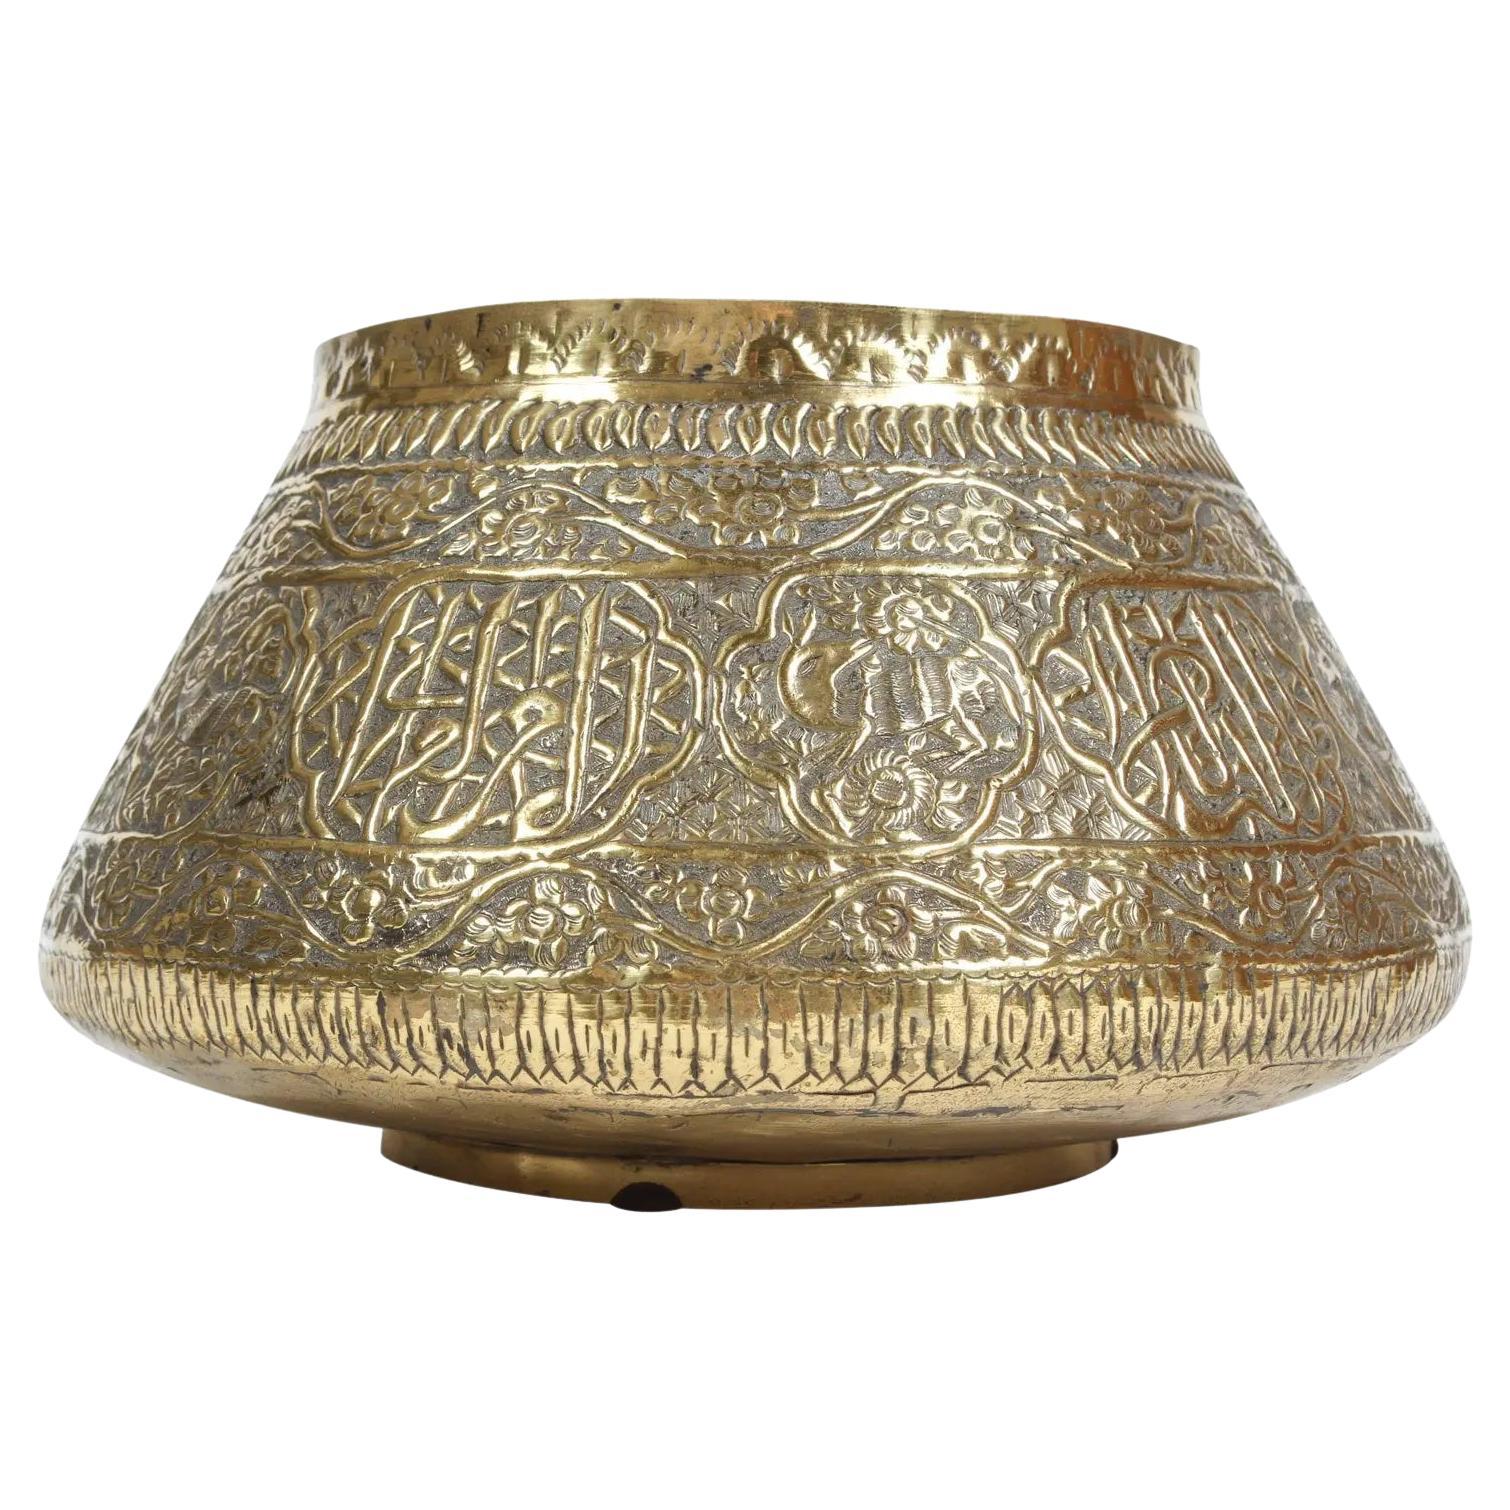 Middle Eastern Brass Bowl with Arabic Calligraphy Writing